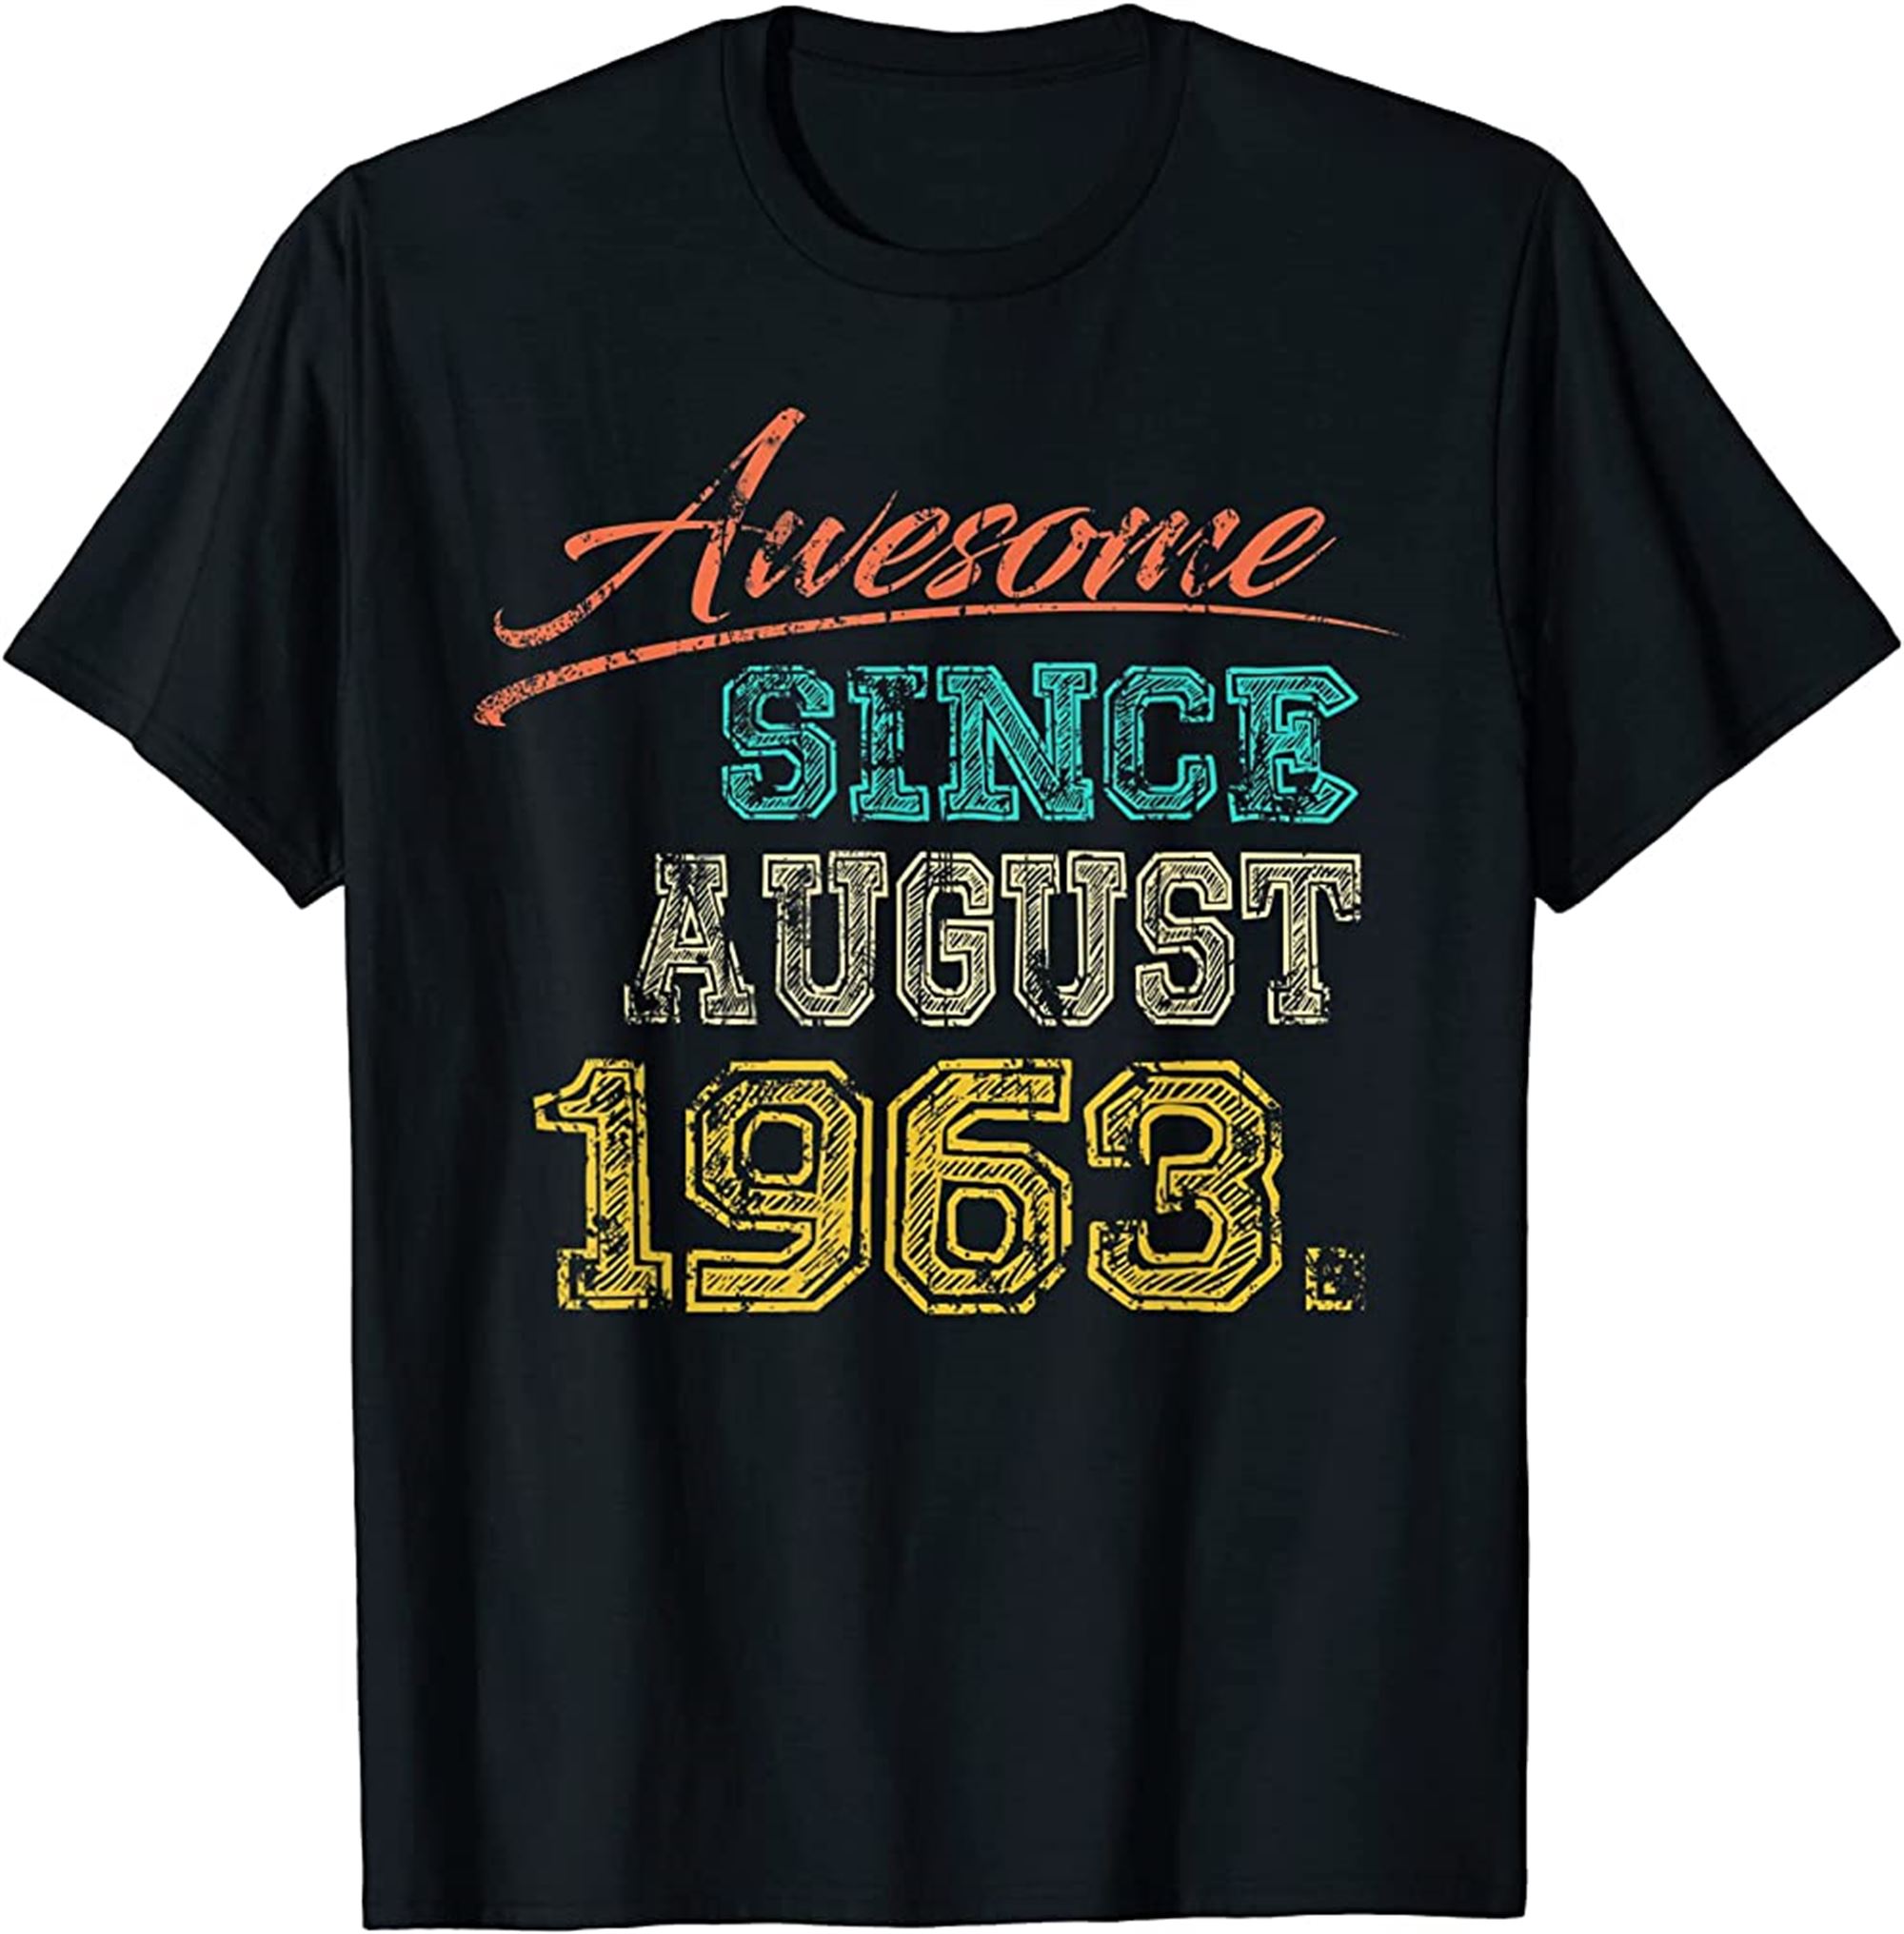 Vintage 1963 Awesome Since August Happy My 59th Birthday T-shirt Size Up To 5xl